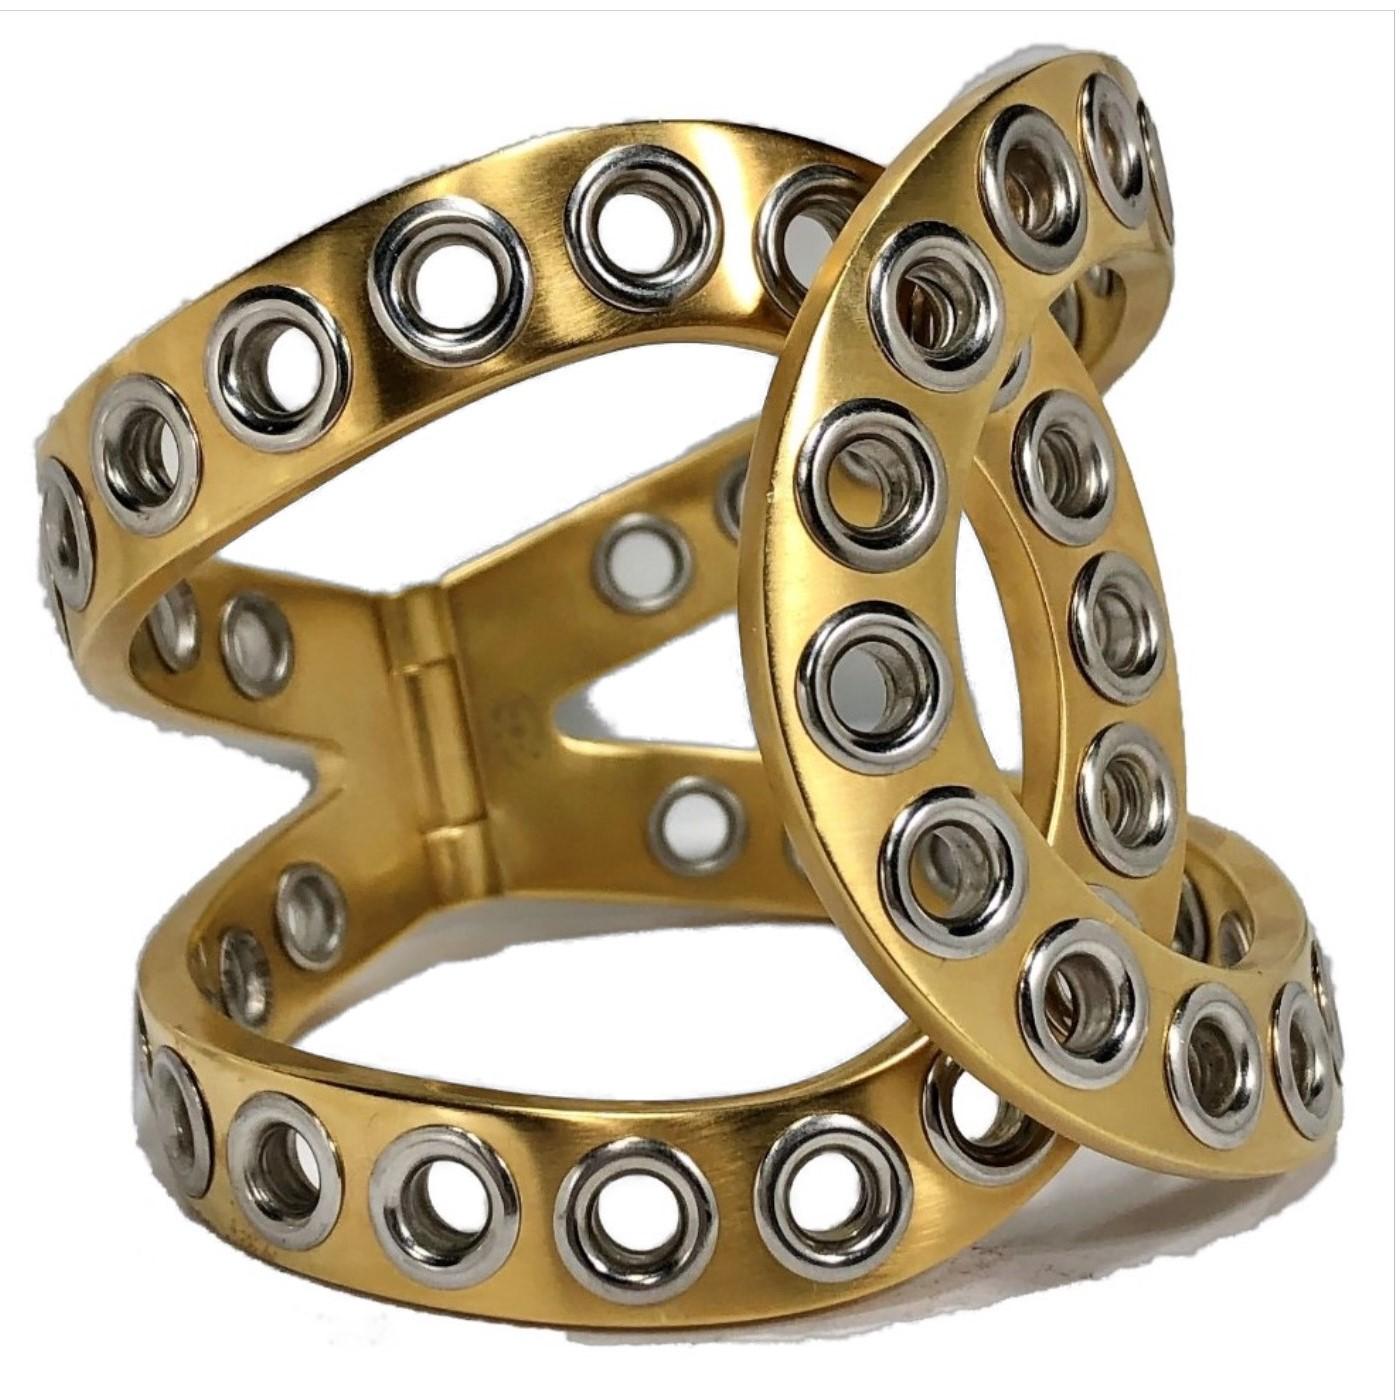 This very stylish Chanel cuff is crafted from satin finish gold tone metal with high polish chrome rivets over it's entire surface. It's a perfect example of chic, contemporary style.  At a full 2 1/8 inches in width,  it is visually powerful. It is